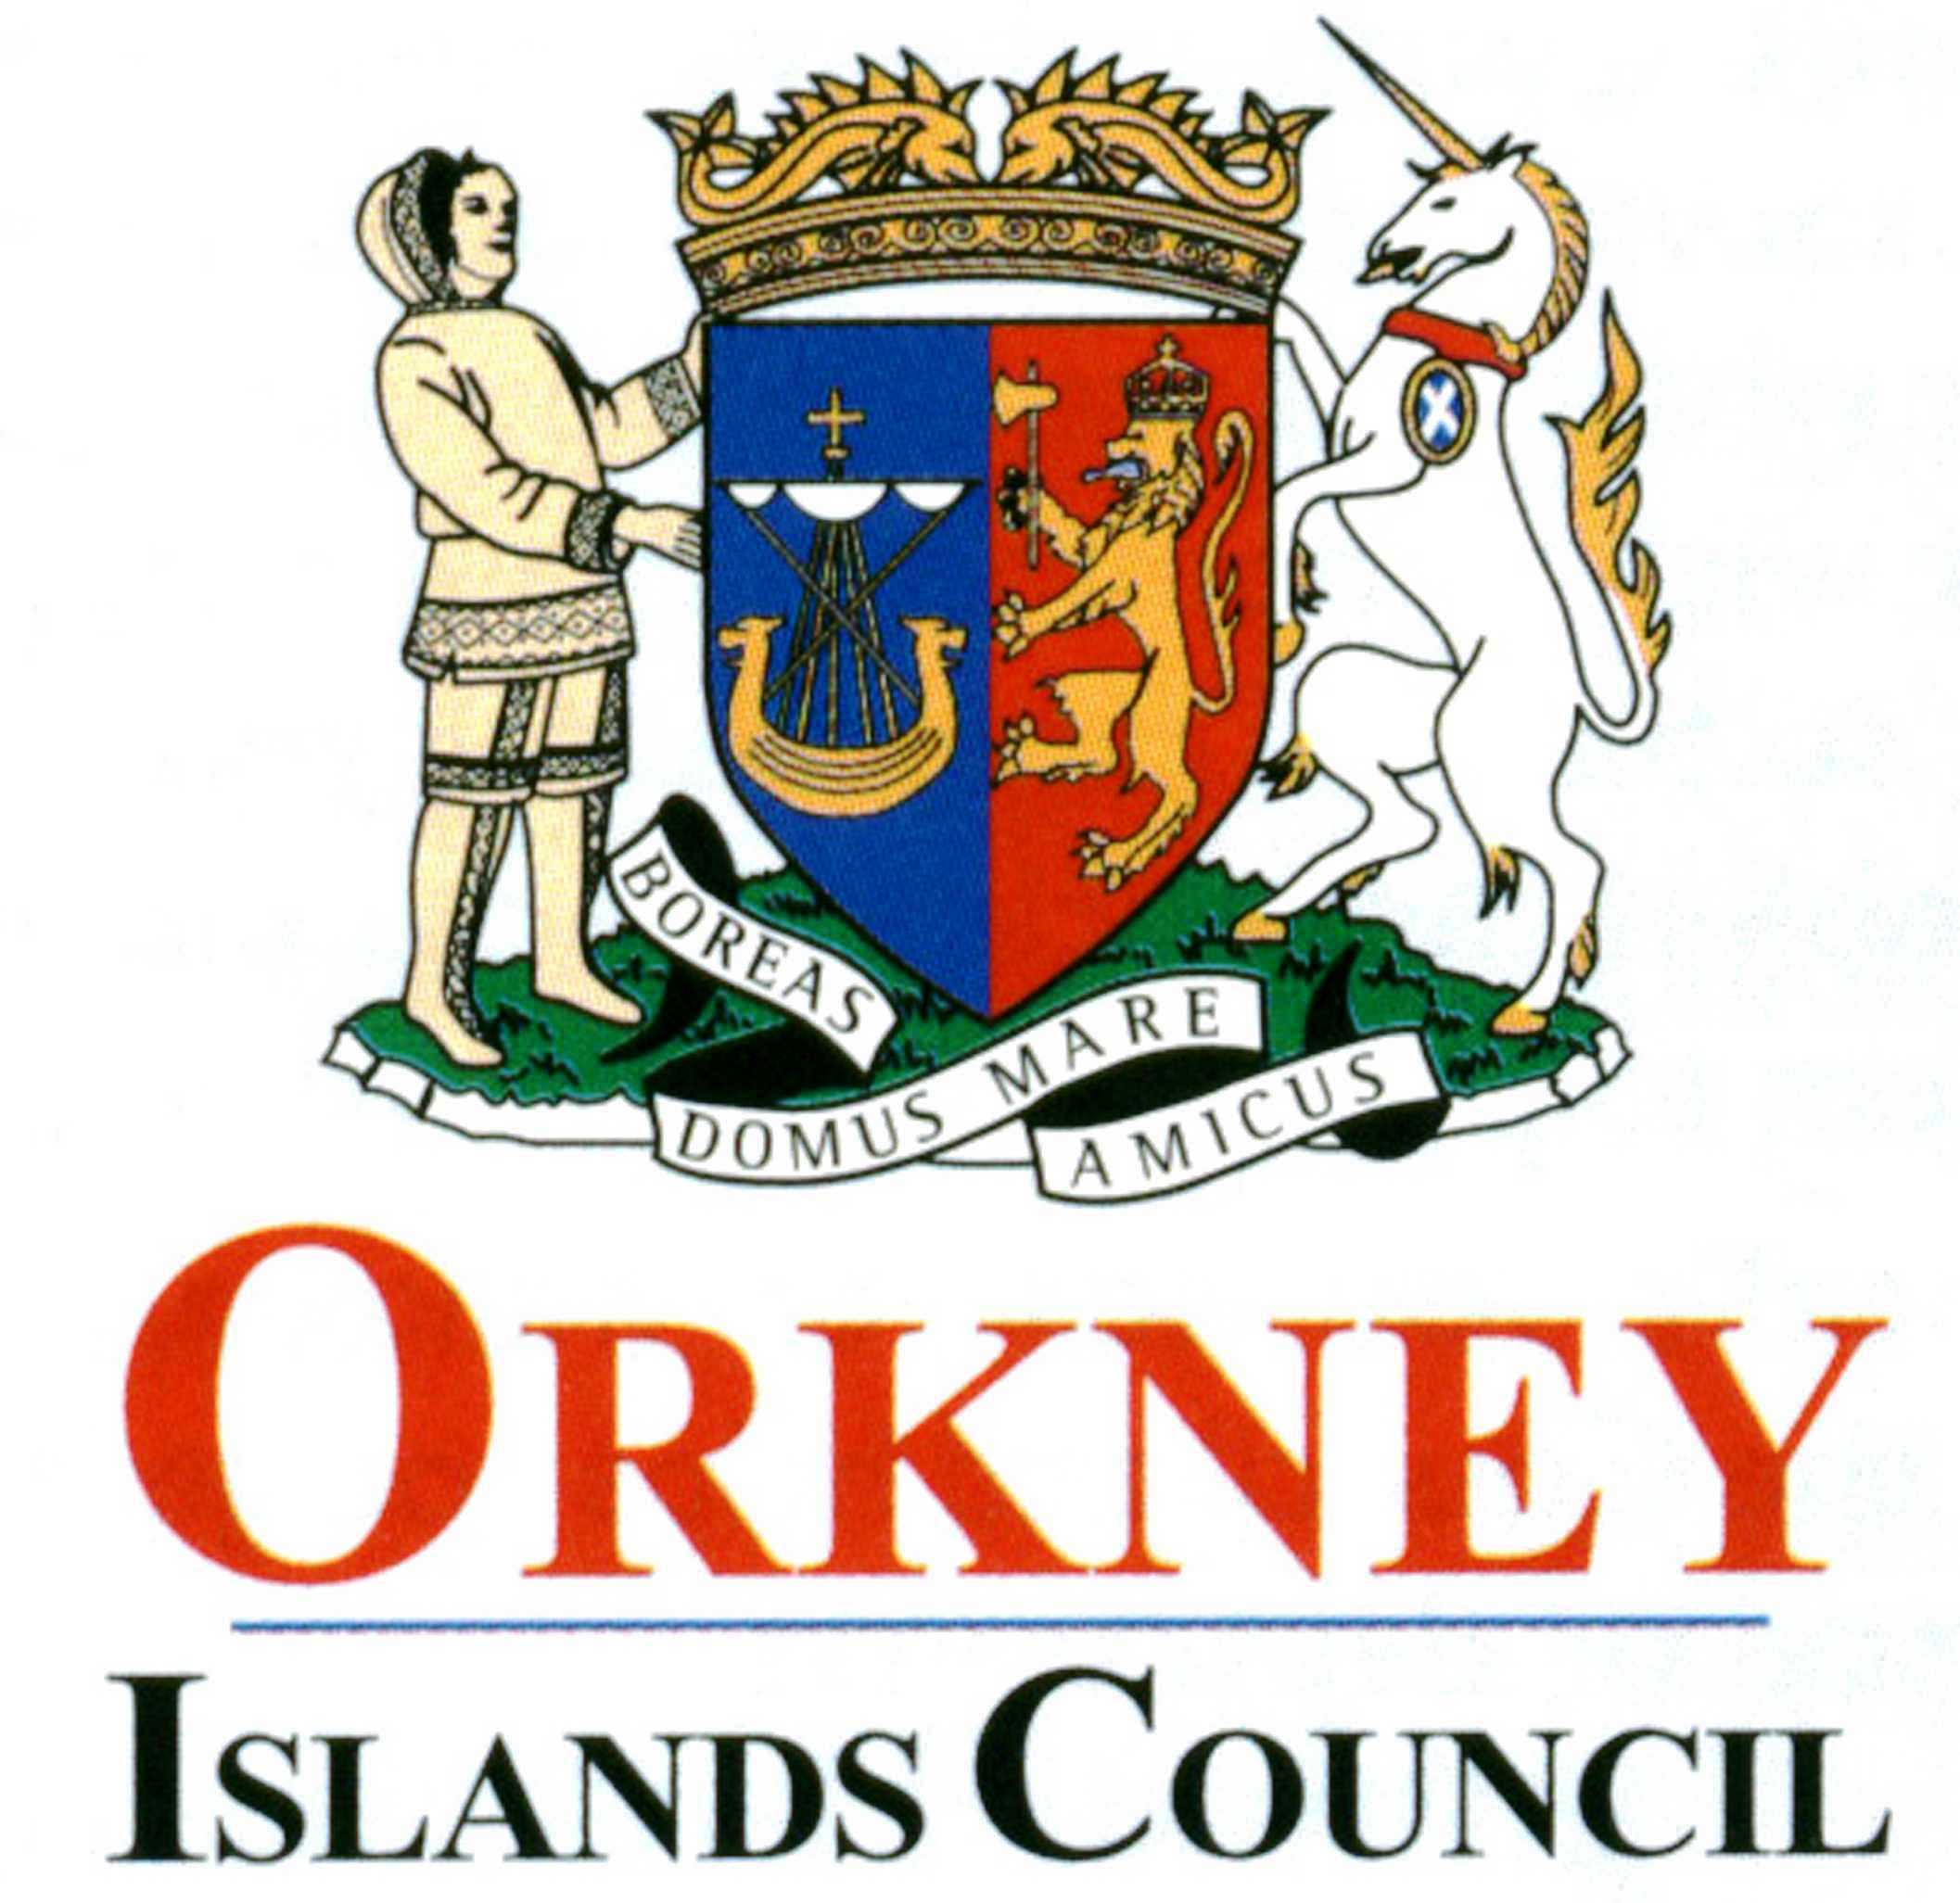 Construction industry recruitment scheme launched by Orkney Islands Council